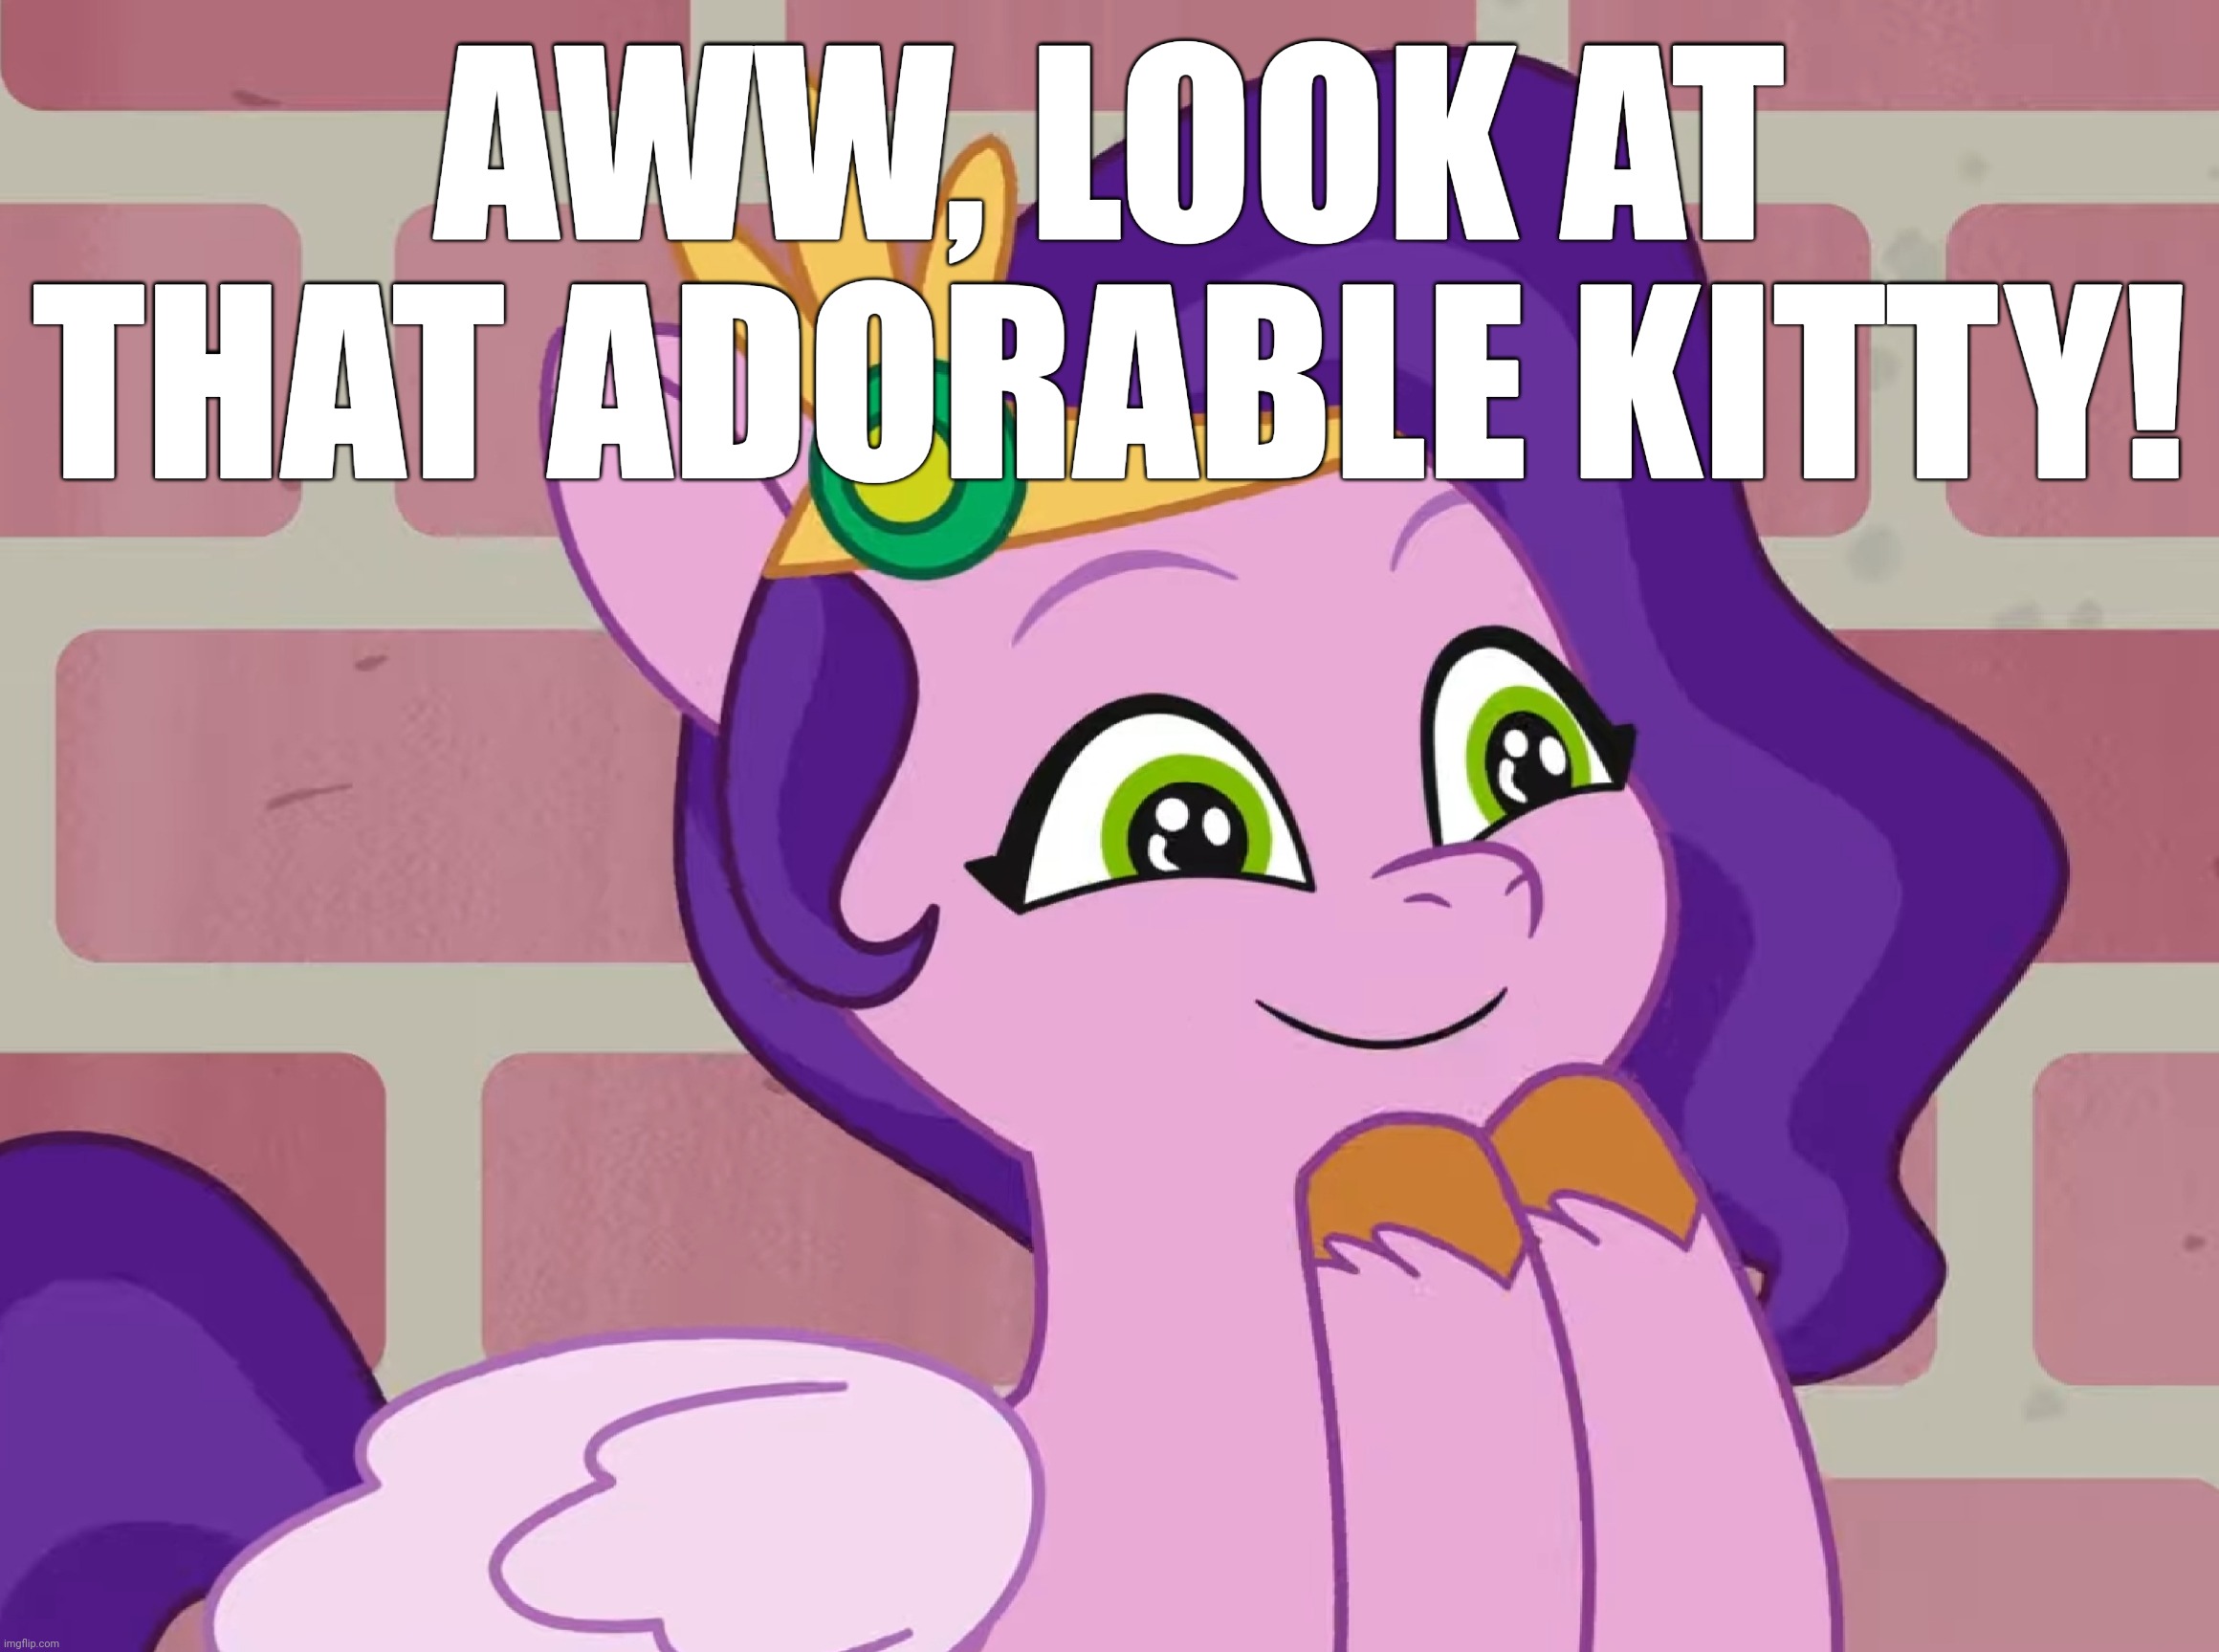 AWW, LOOK AT THAT ADORABLE KITTY! | made w/ Imgflip meme maker